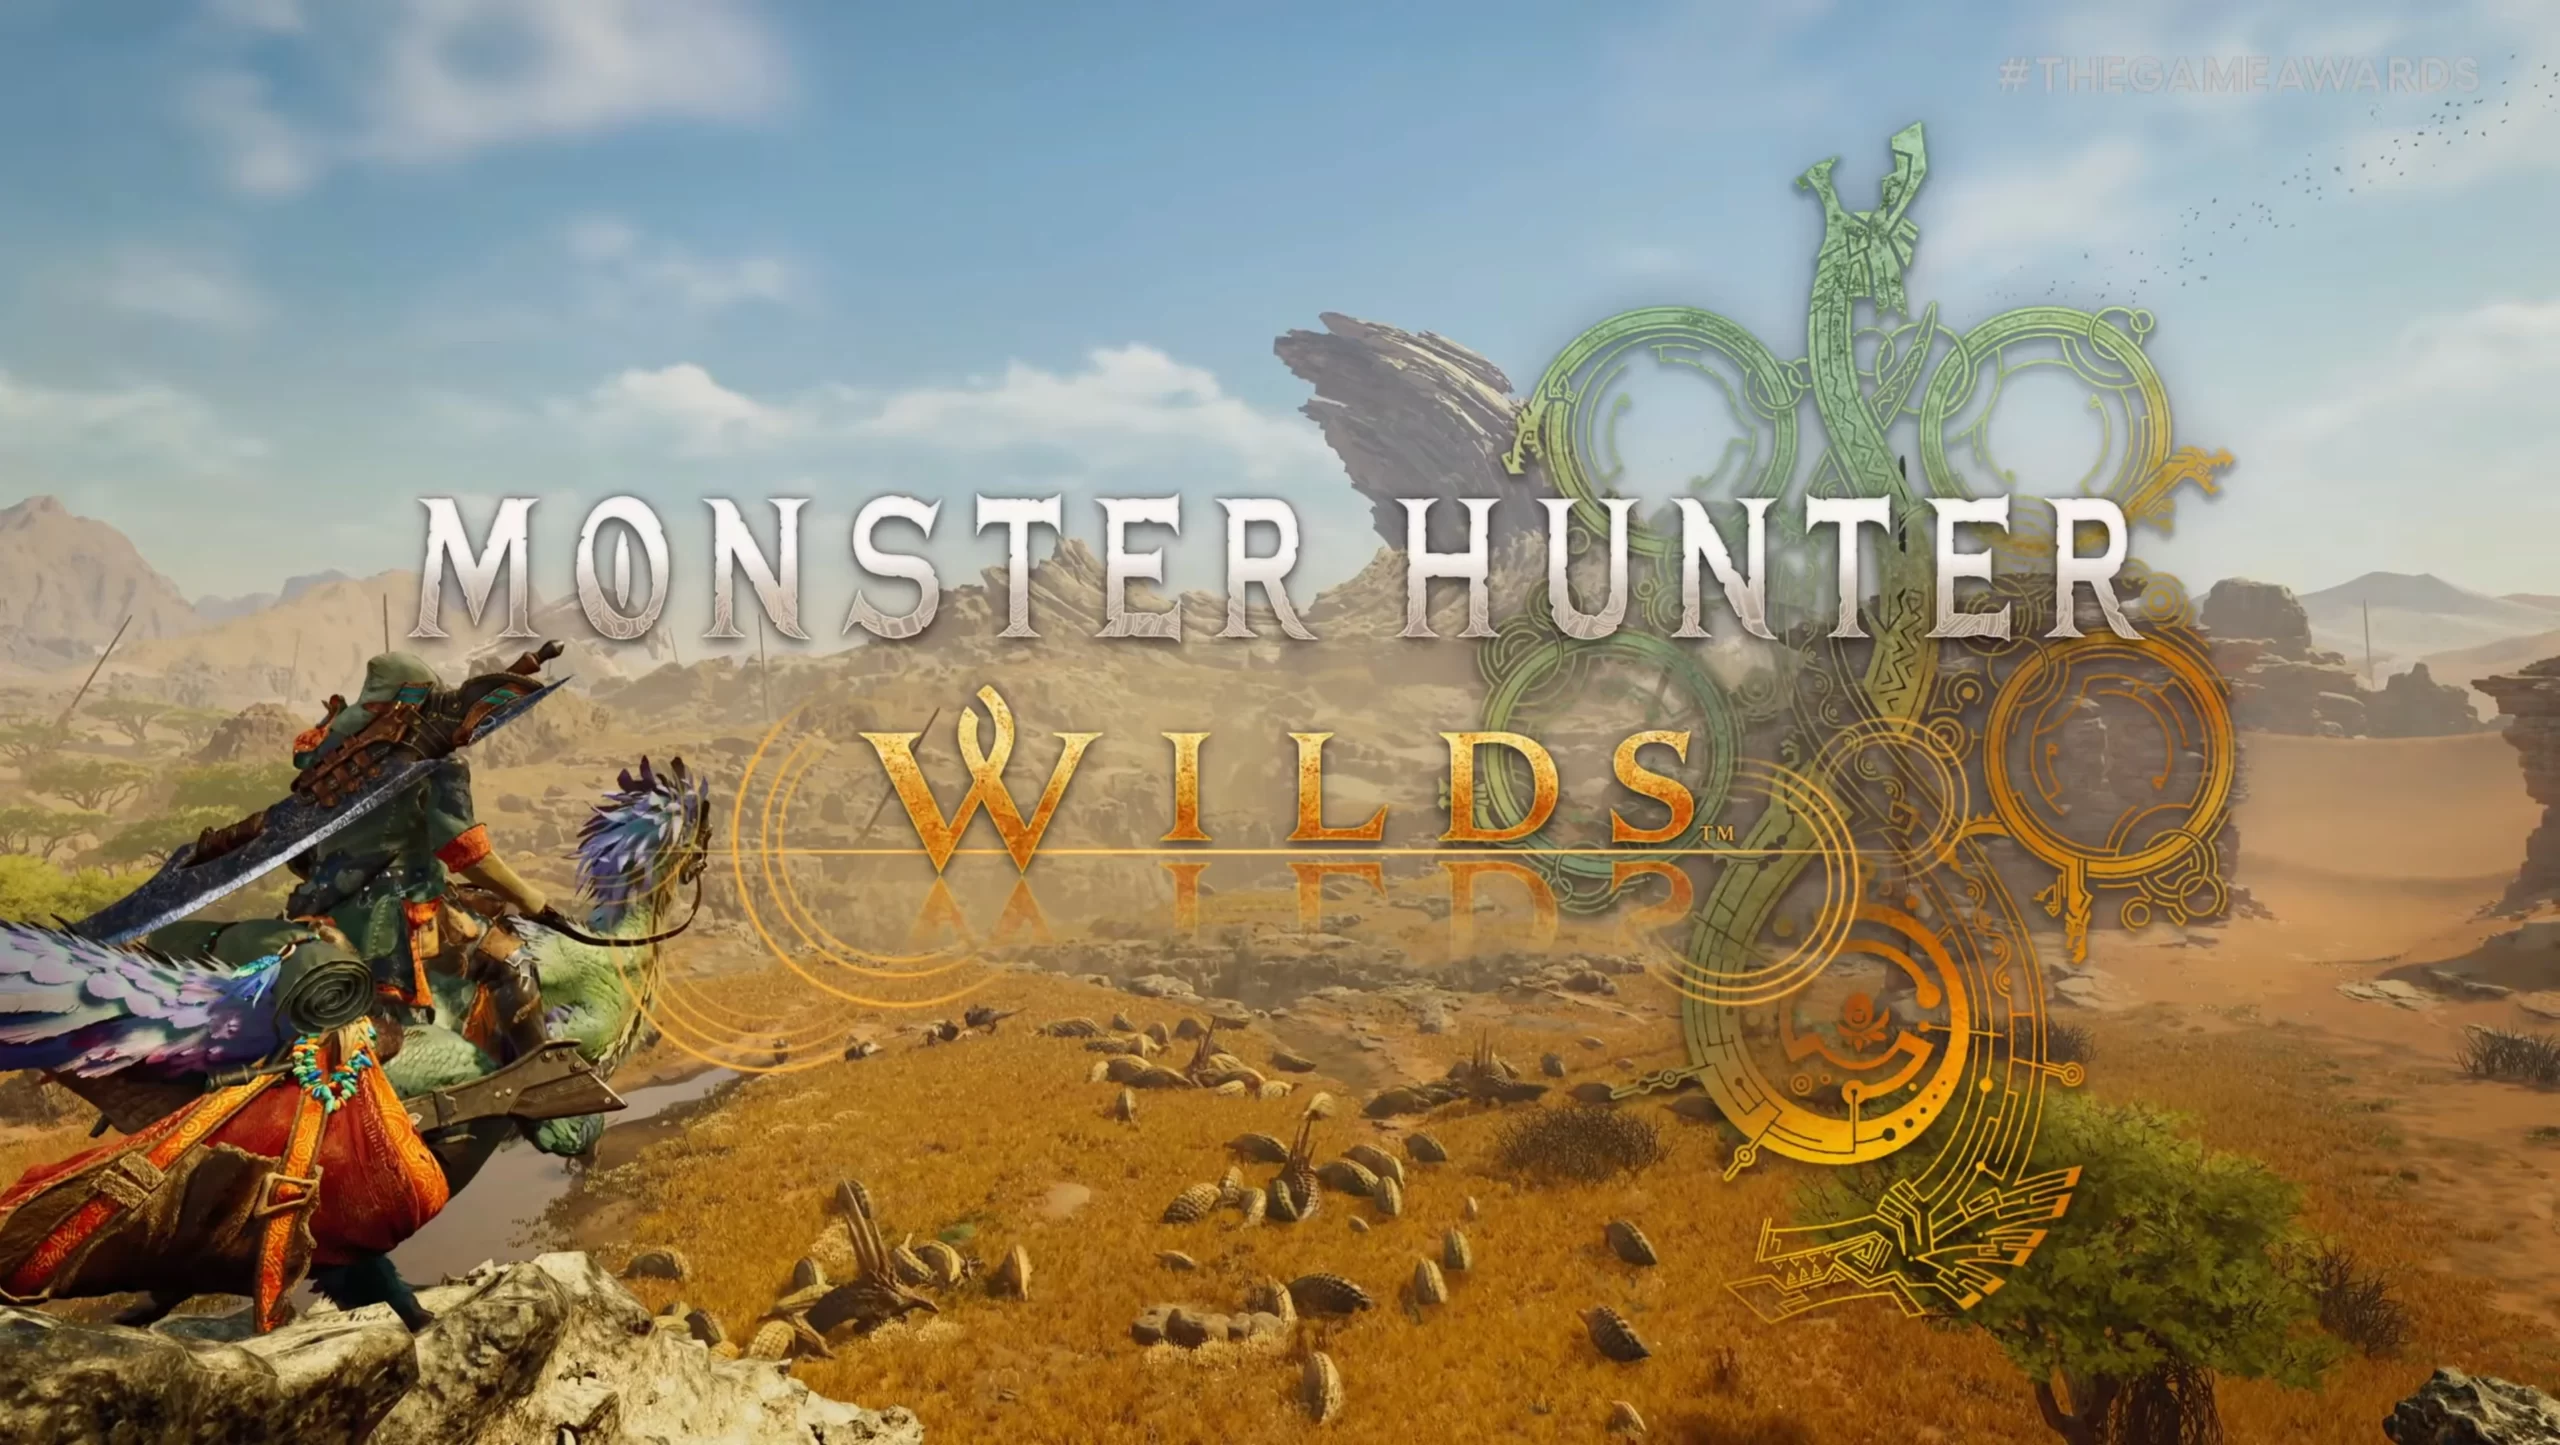 Monster Hunter Wilds New Trailer Shown At State of Play